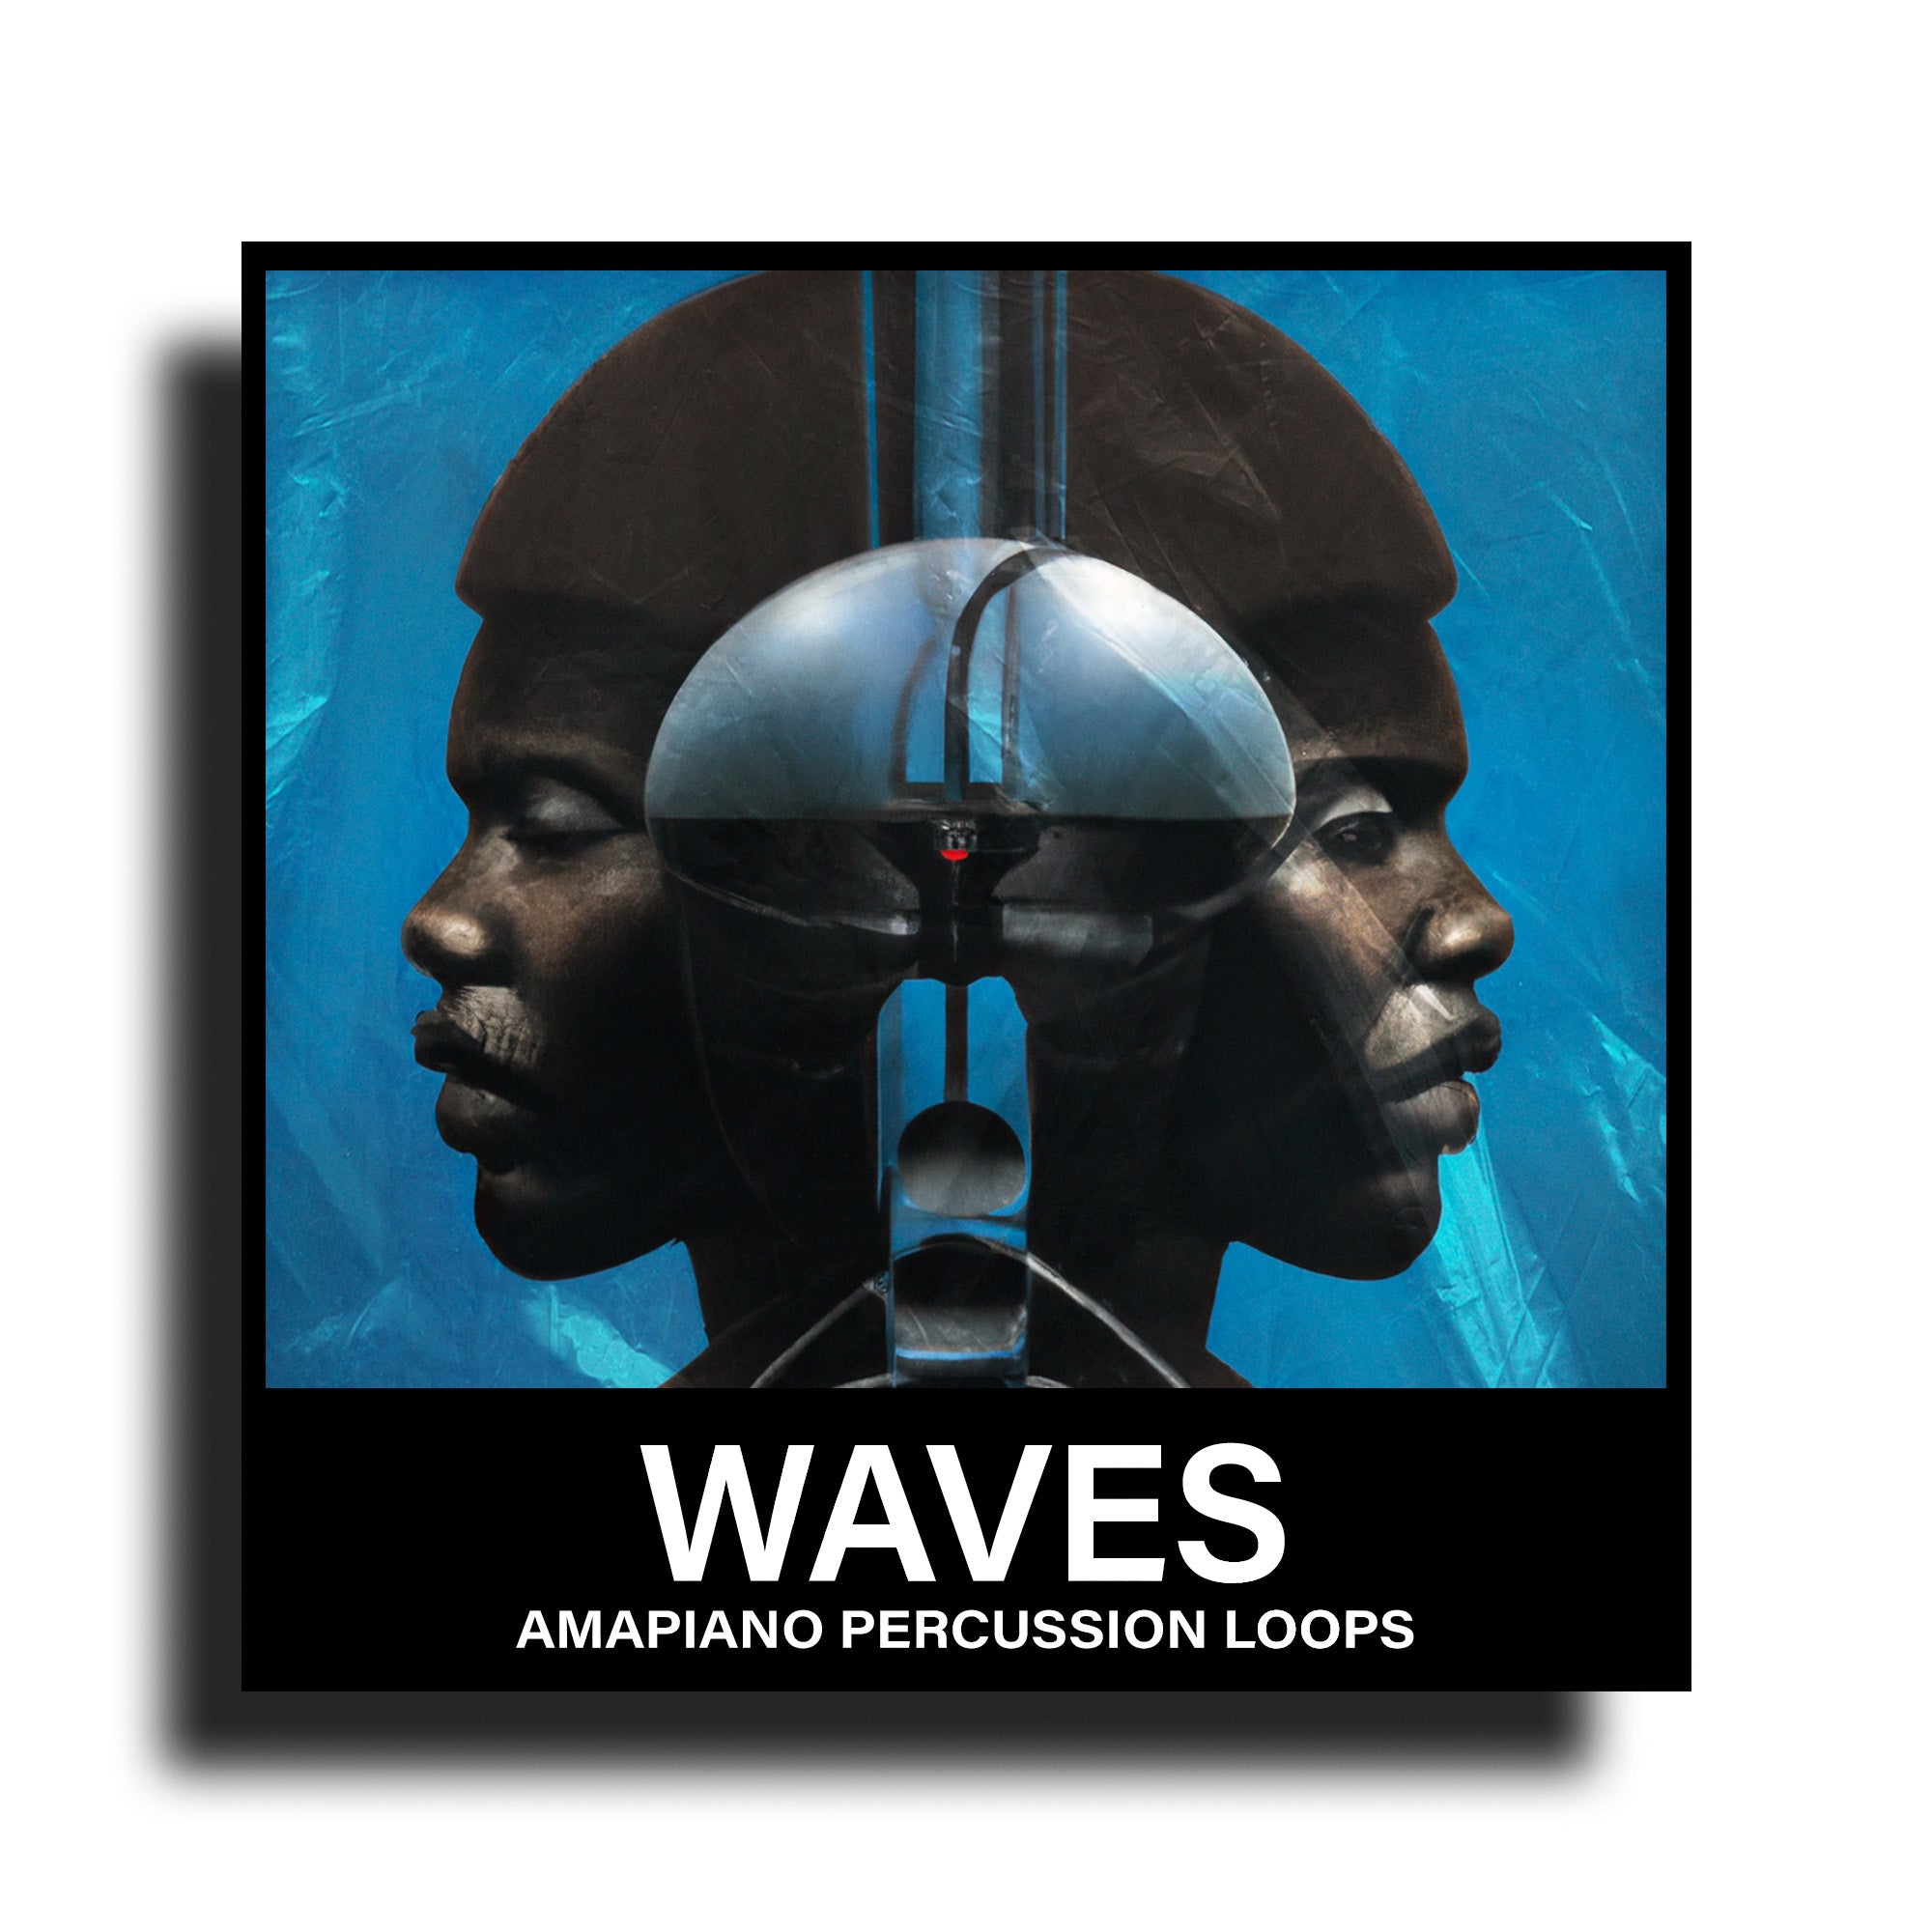 WAVES Amapiano Percussion Loops